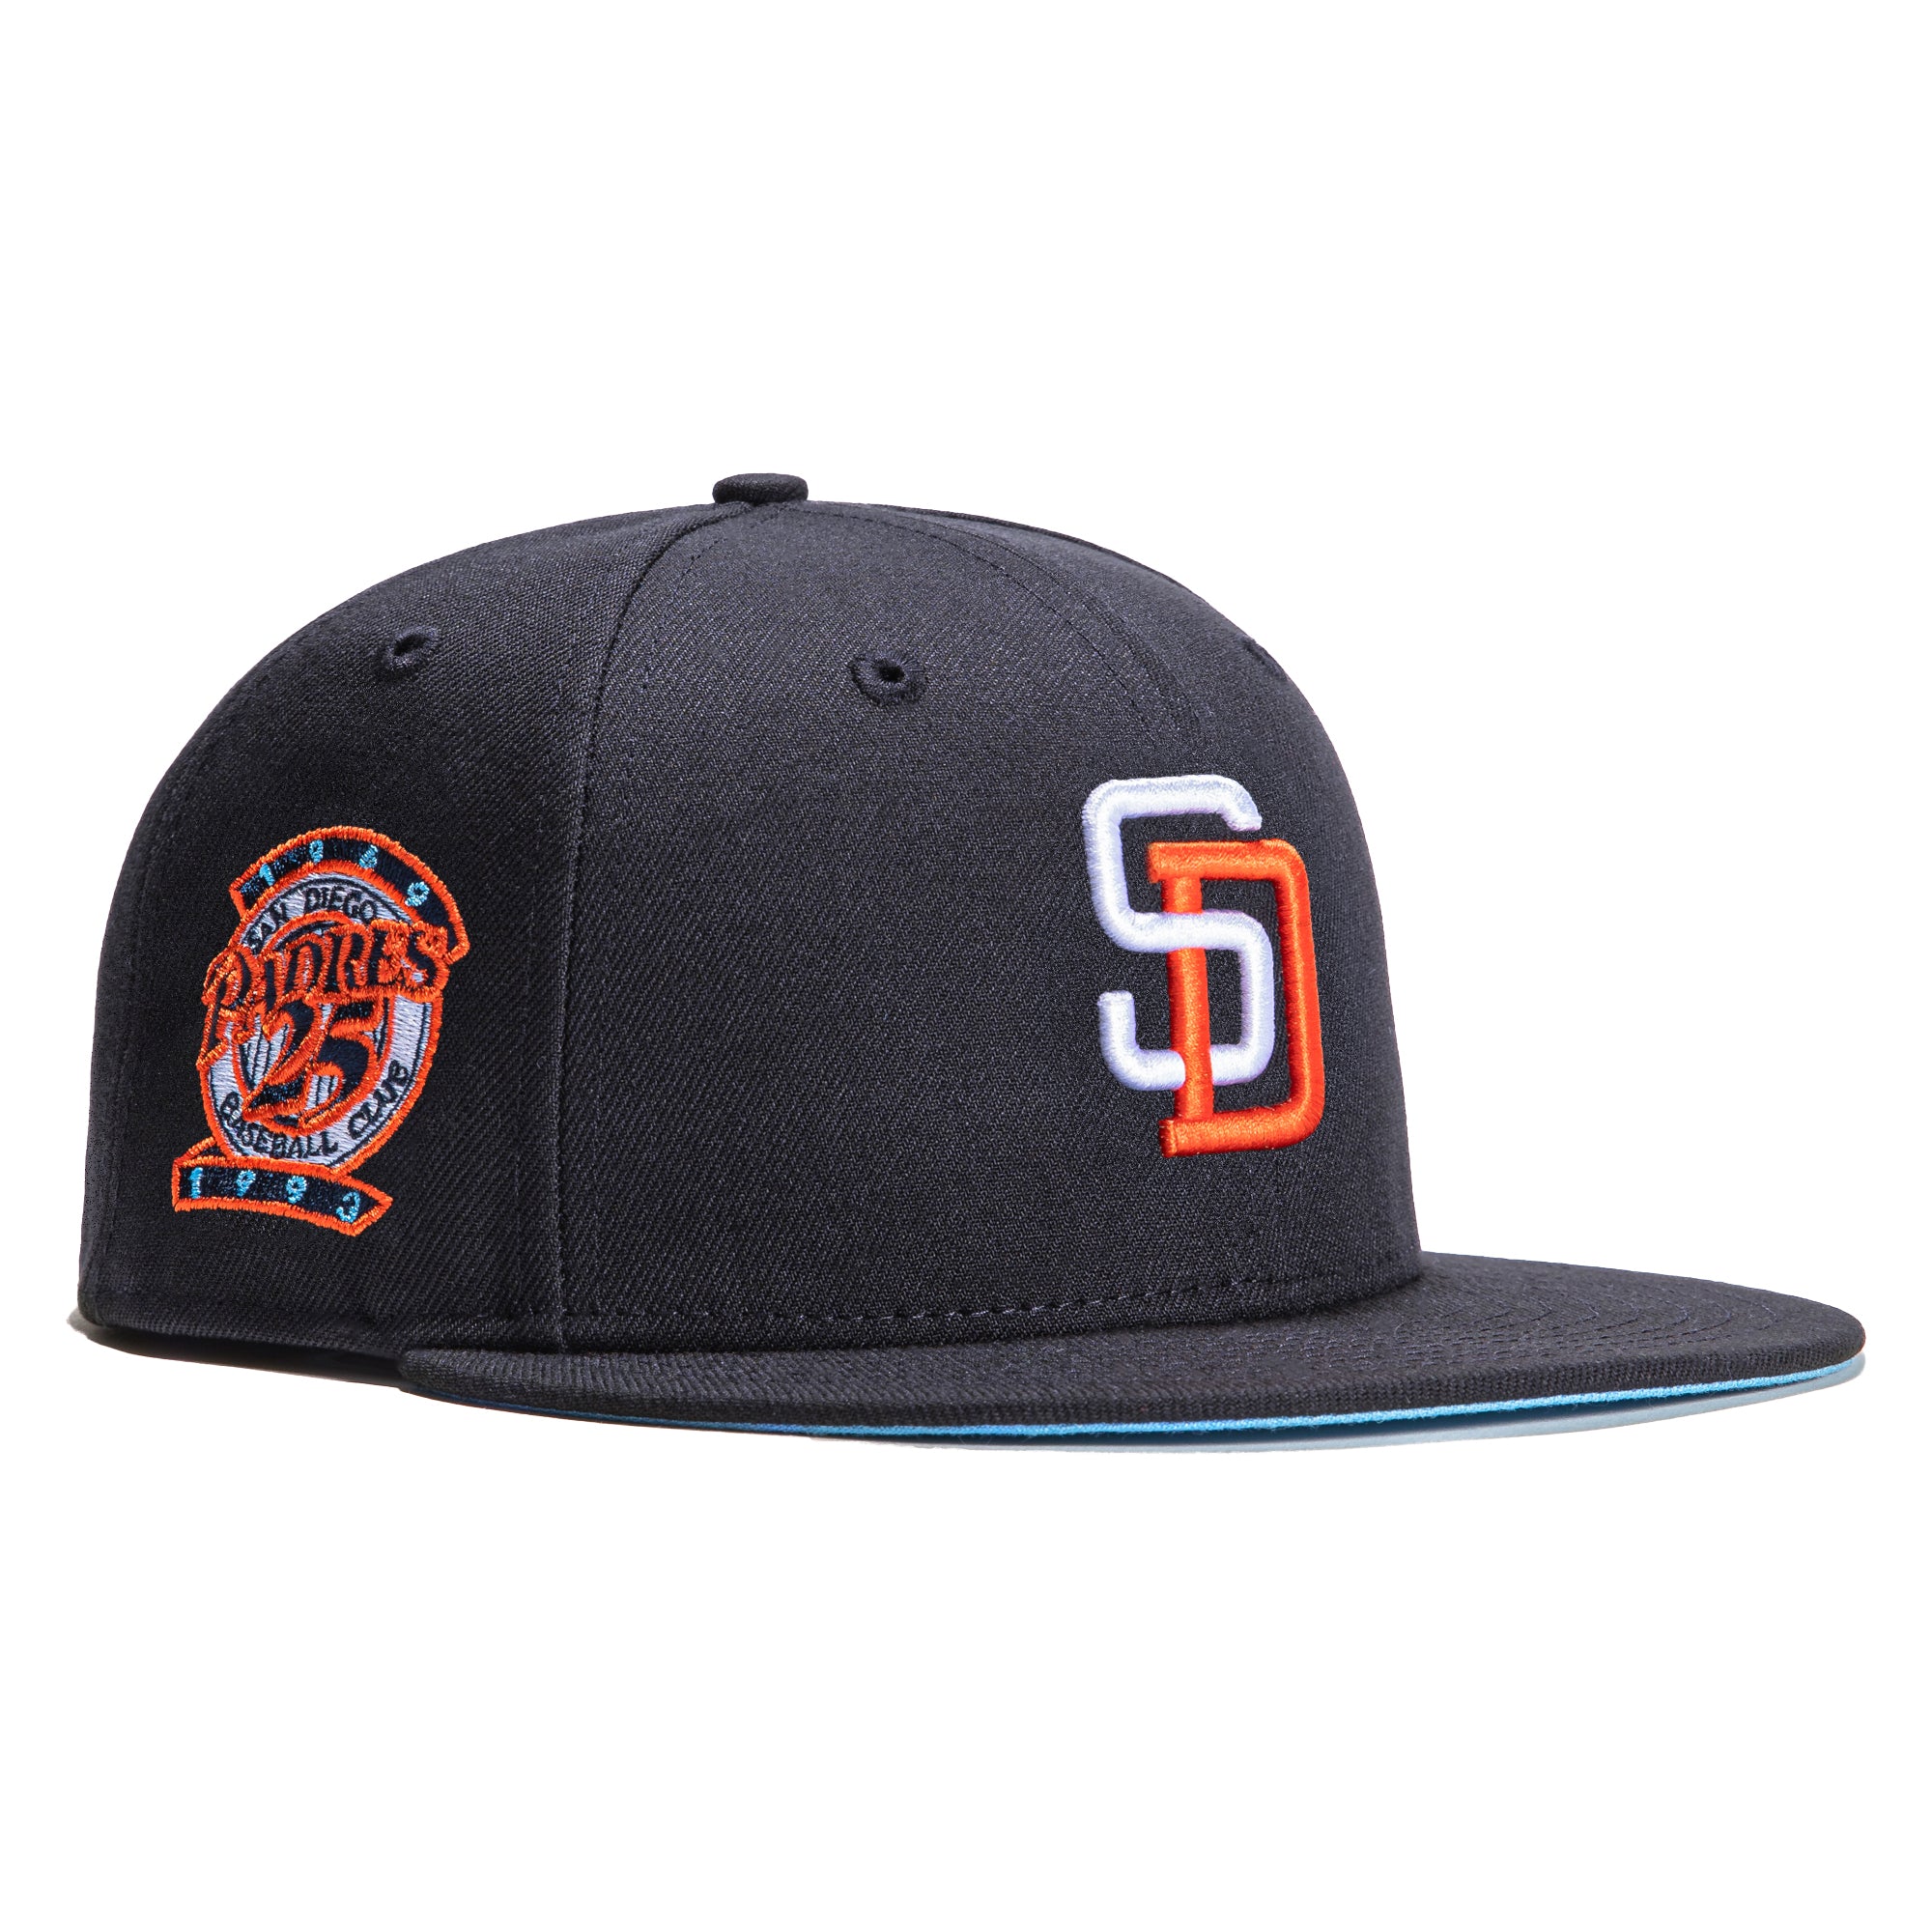 Men's New Era Navy San Diego Padres 25th Anniversary Cooperstown Collection  Team UV 59FIFTY Fitted Hat